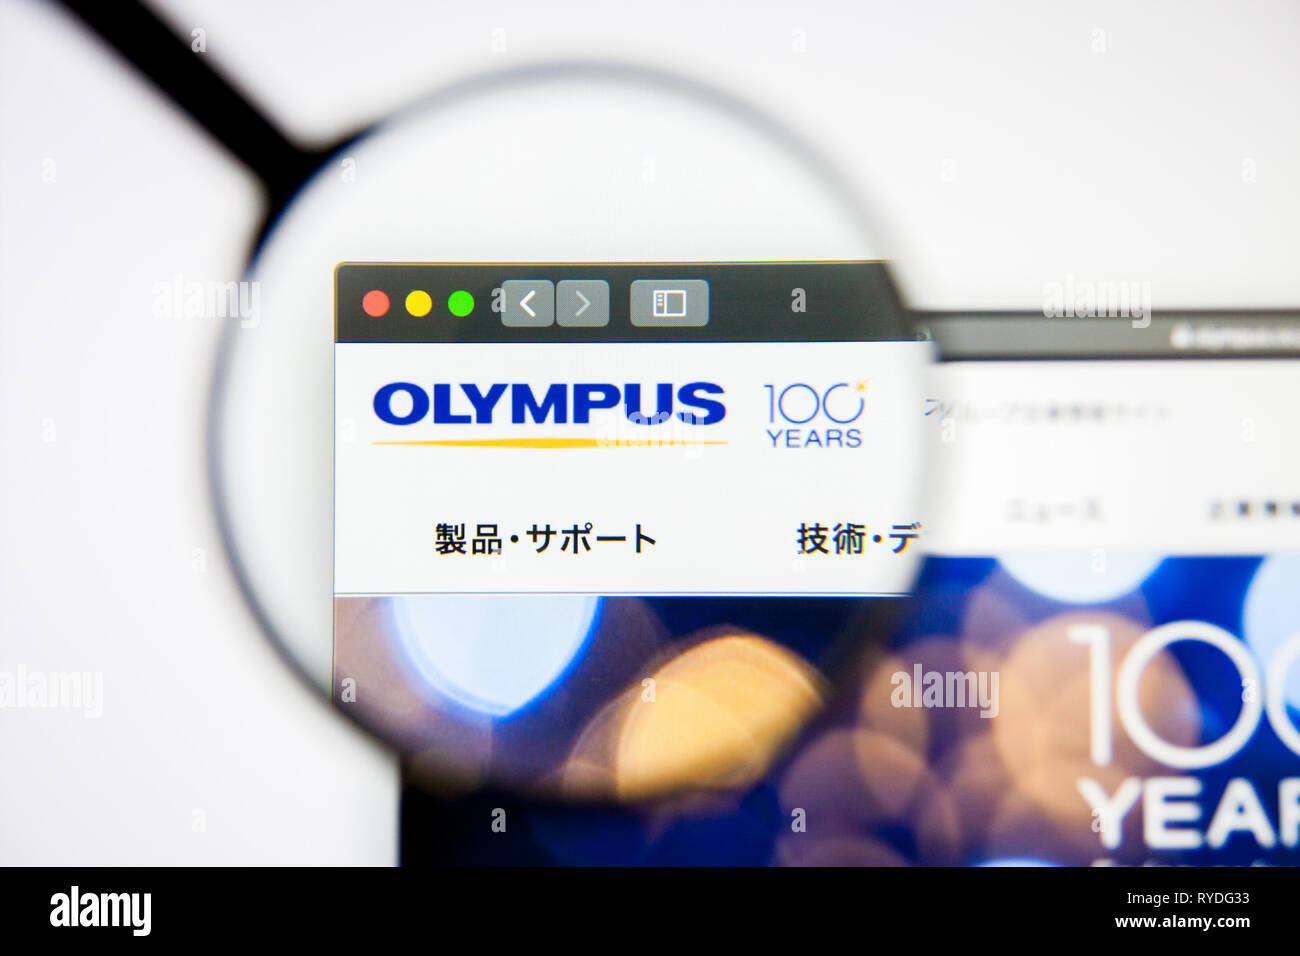 Los Angeles, California, USA - 5 March 2019: Olympus website homepage. Olympus logo visible on display screen, Illustrative Editorial Stock Photo